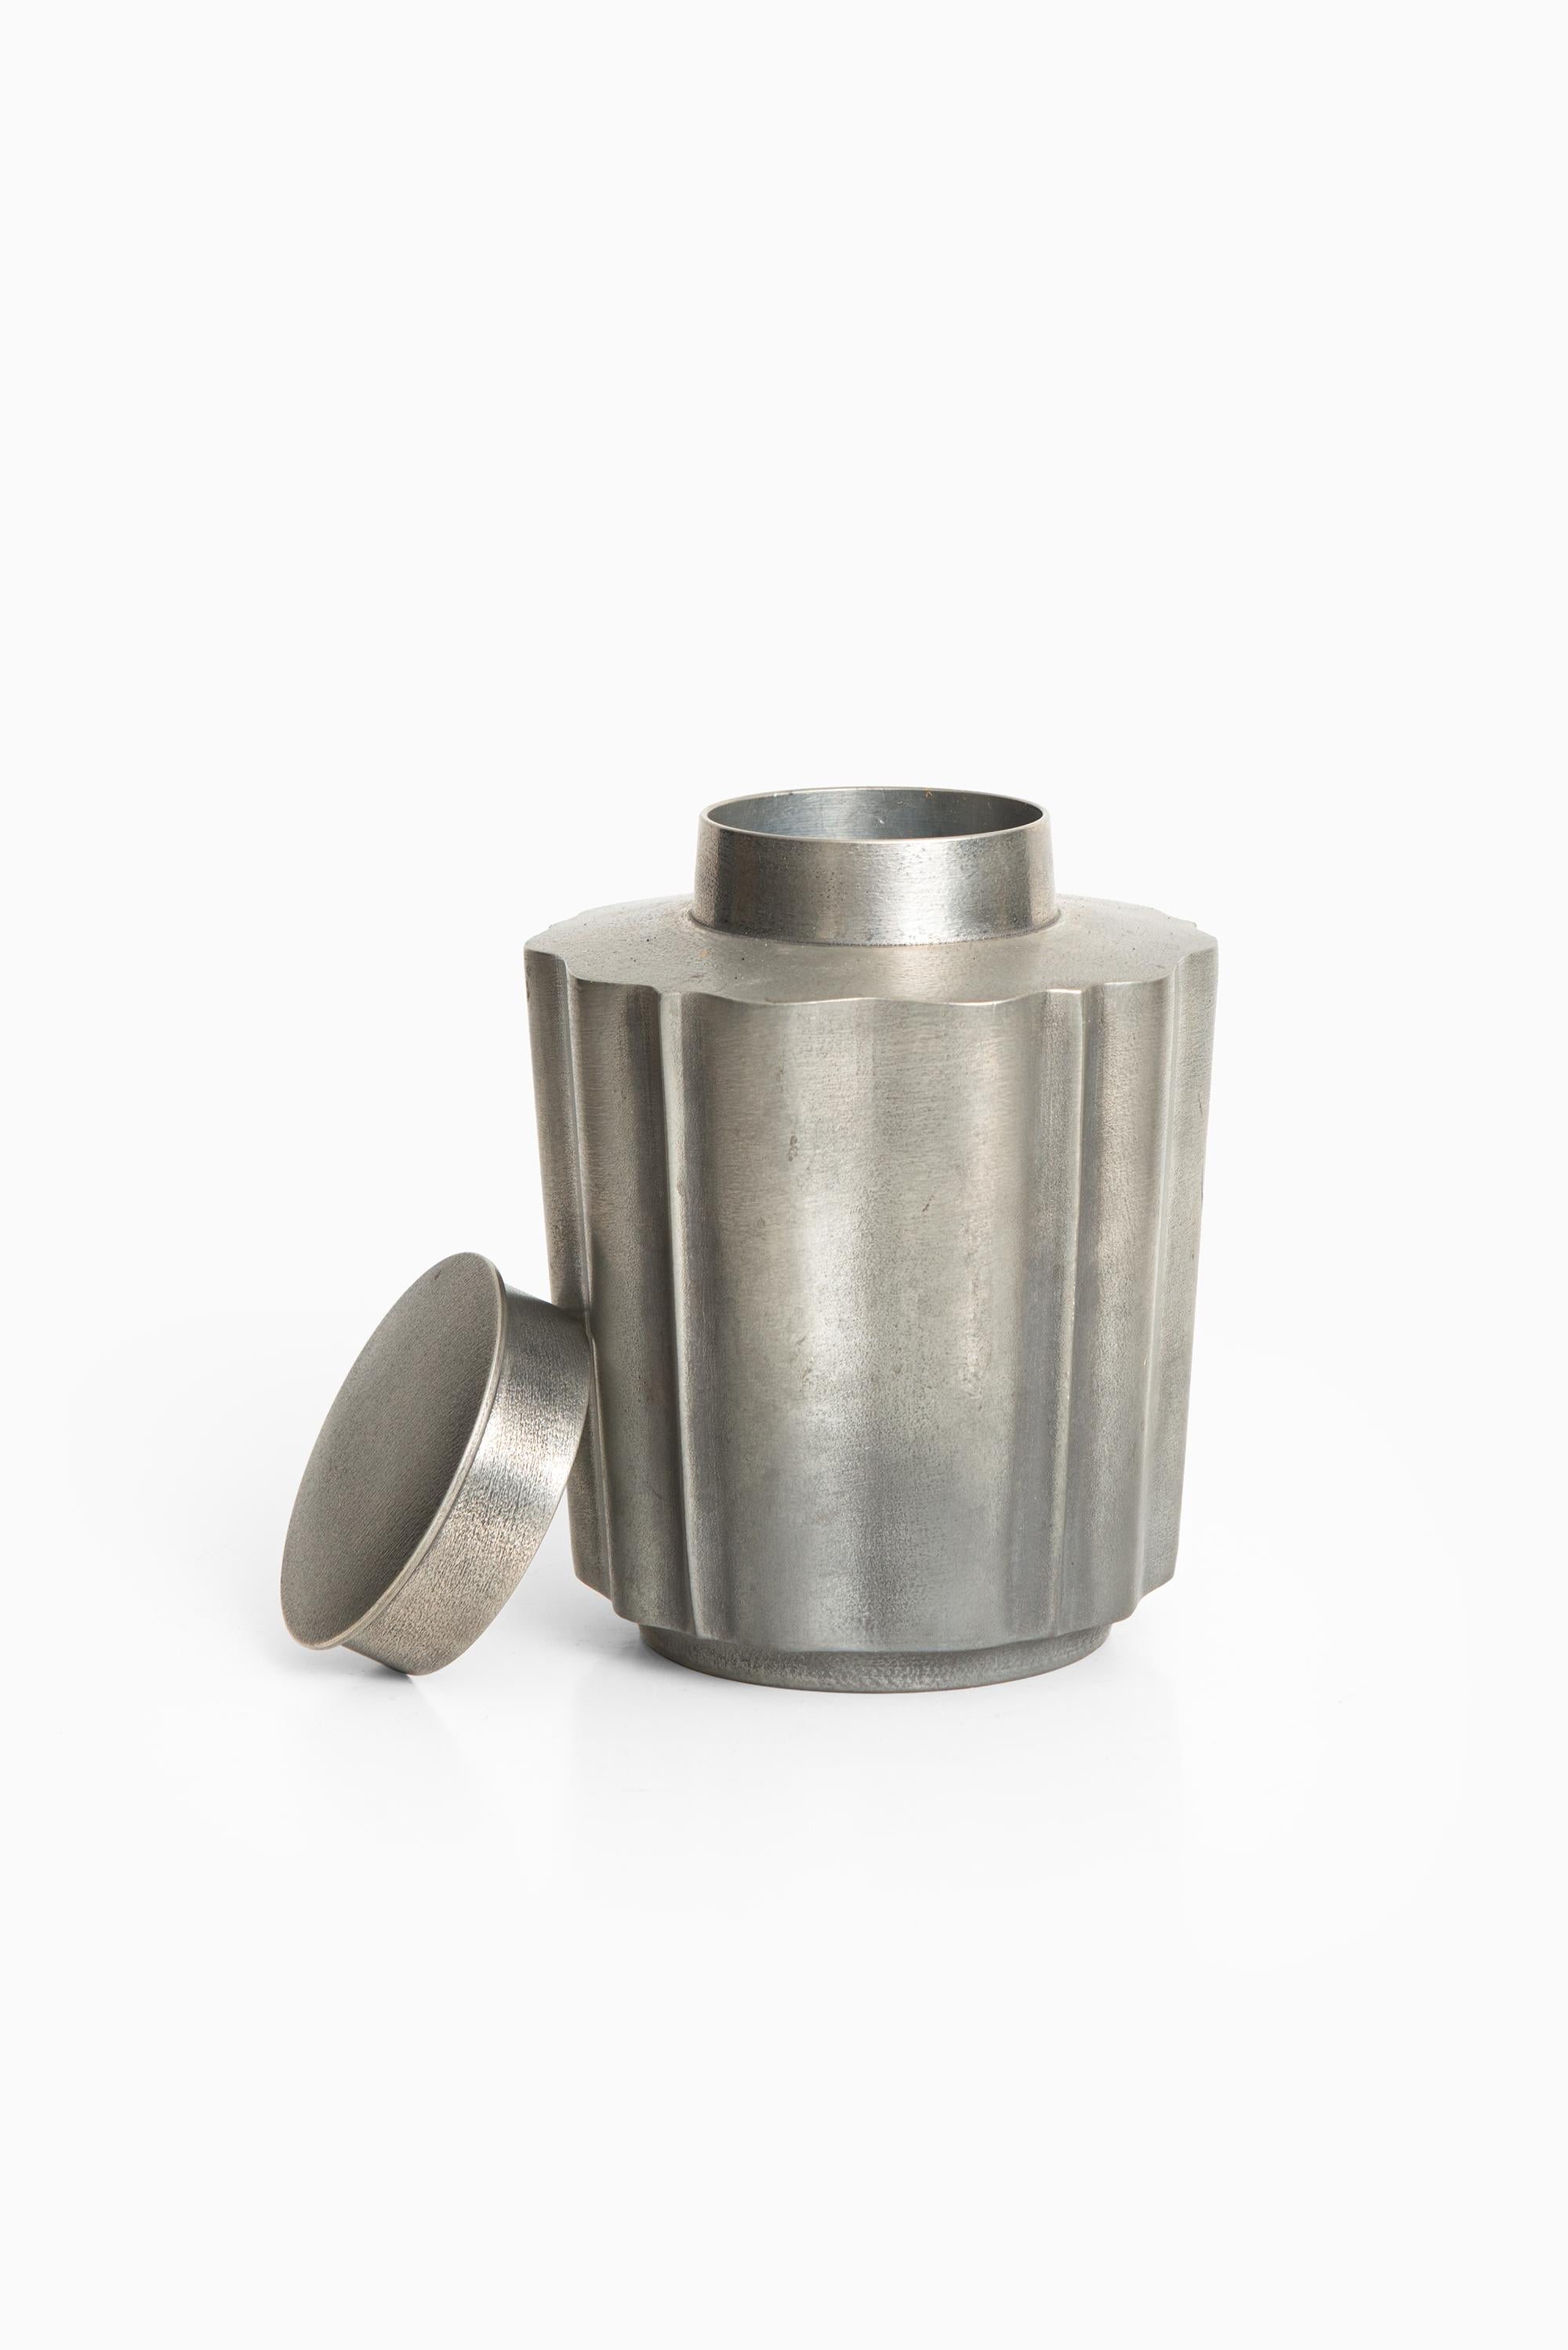 Pewter jar with lid designed by Edvin Ollers. Produced in Sweden.